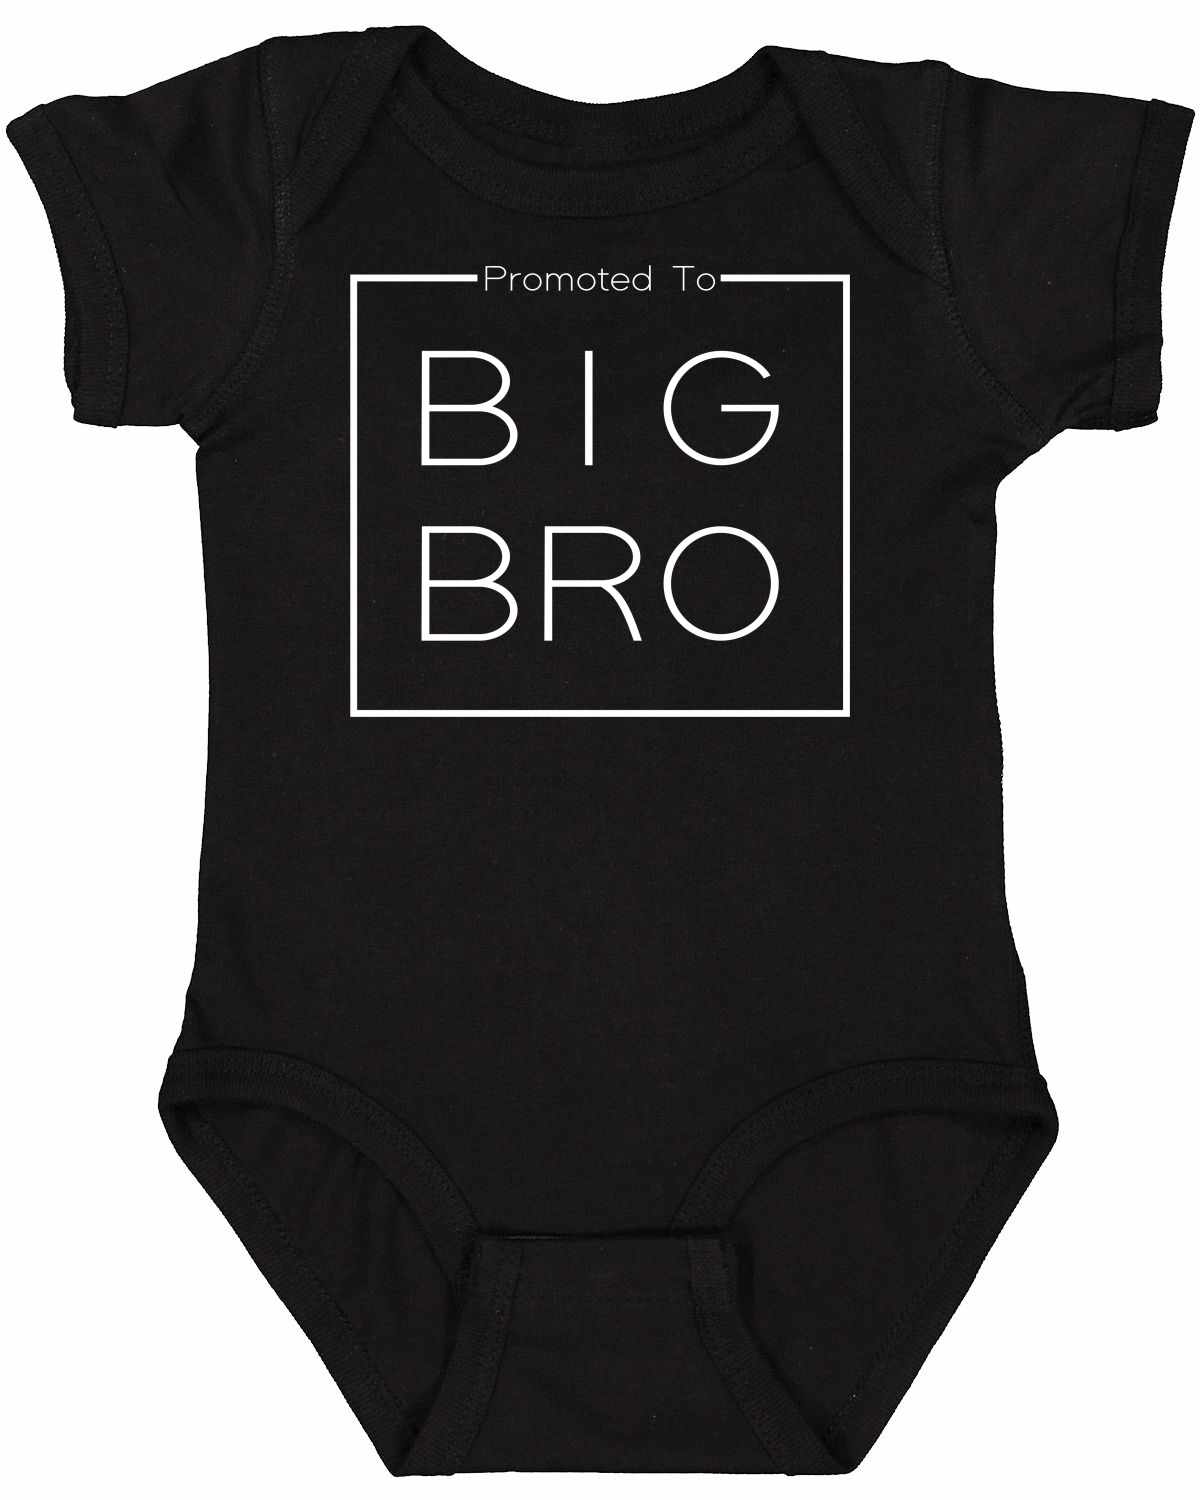 Promoted to Big Bro- Big Brother Box on Infant BodySuit